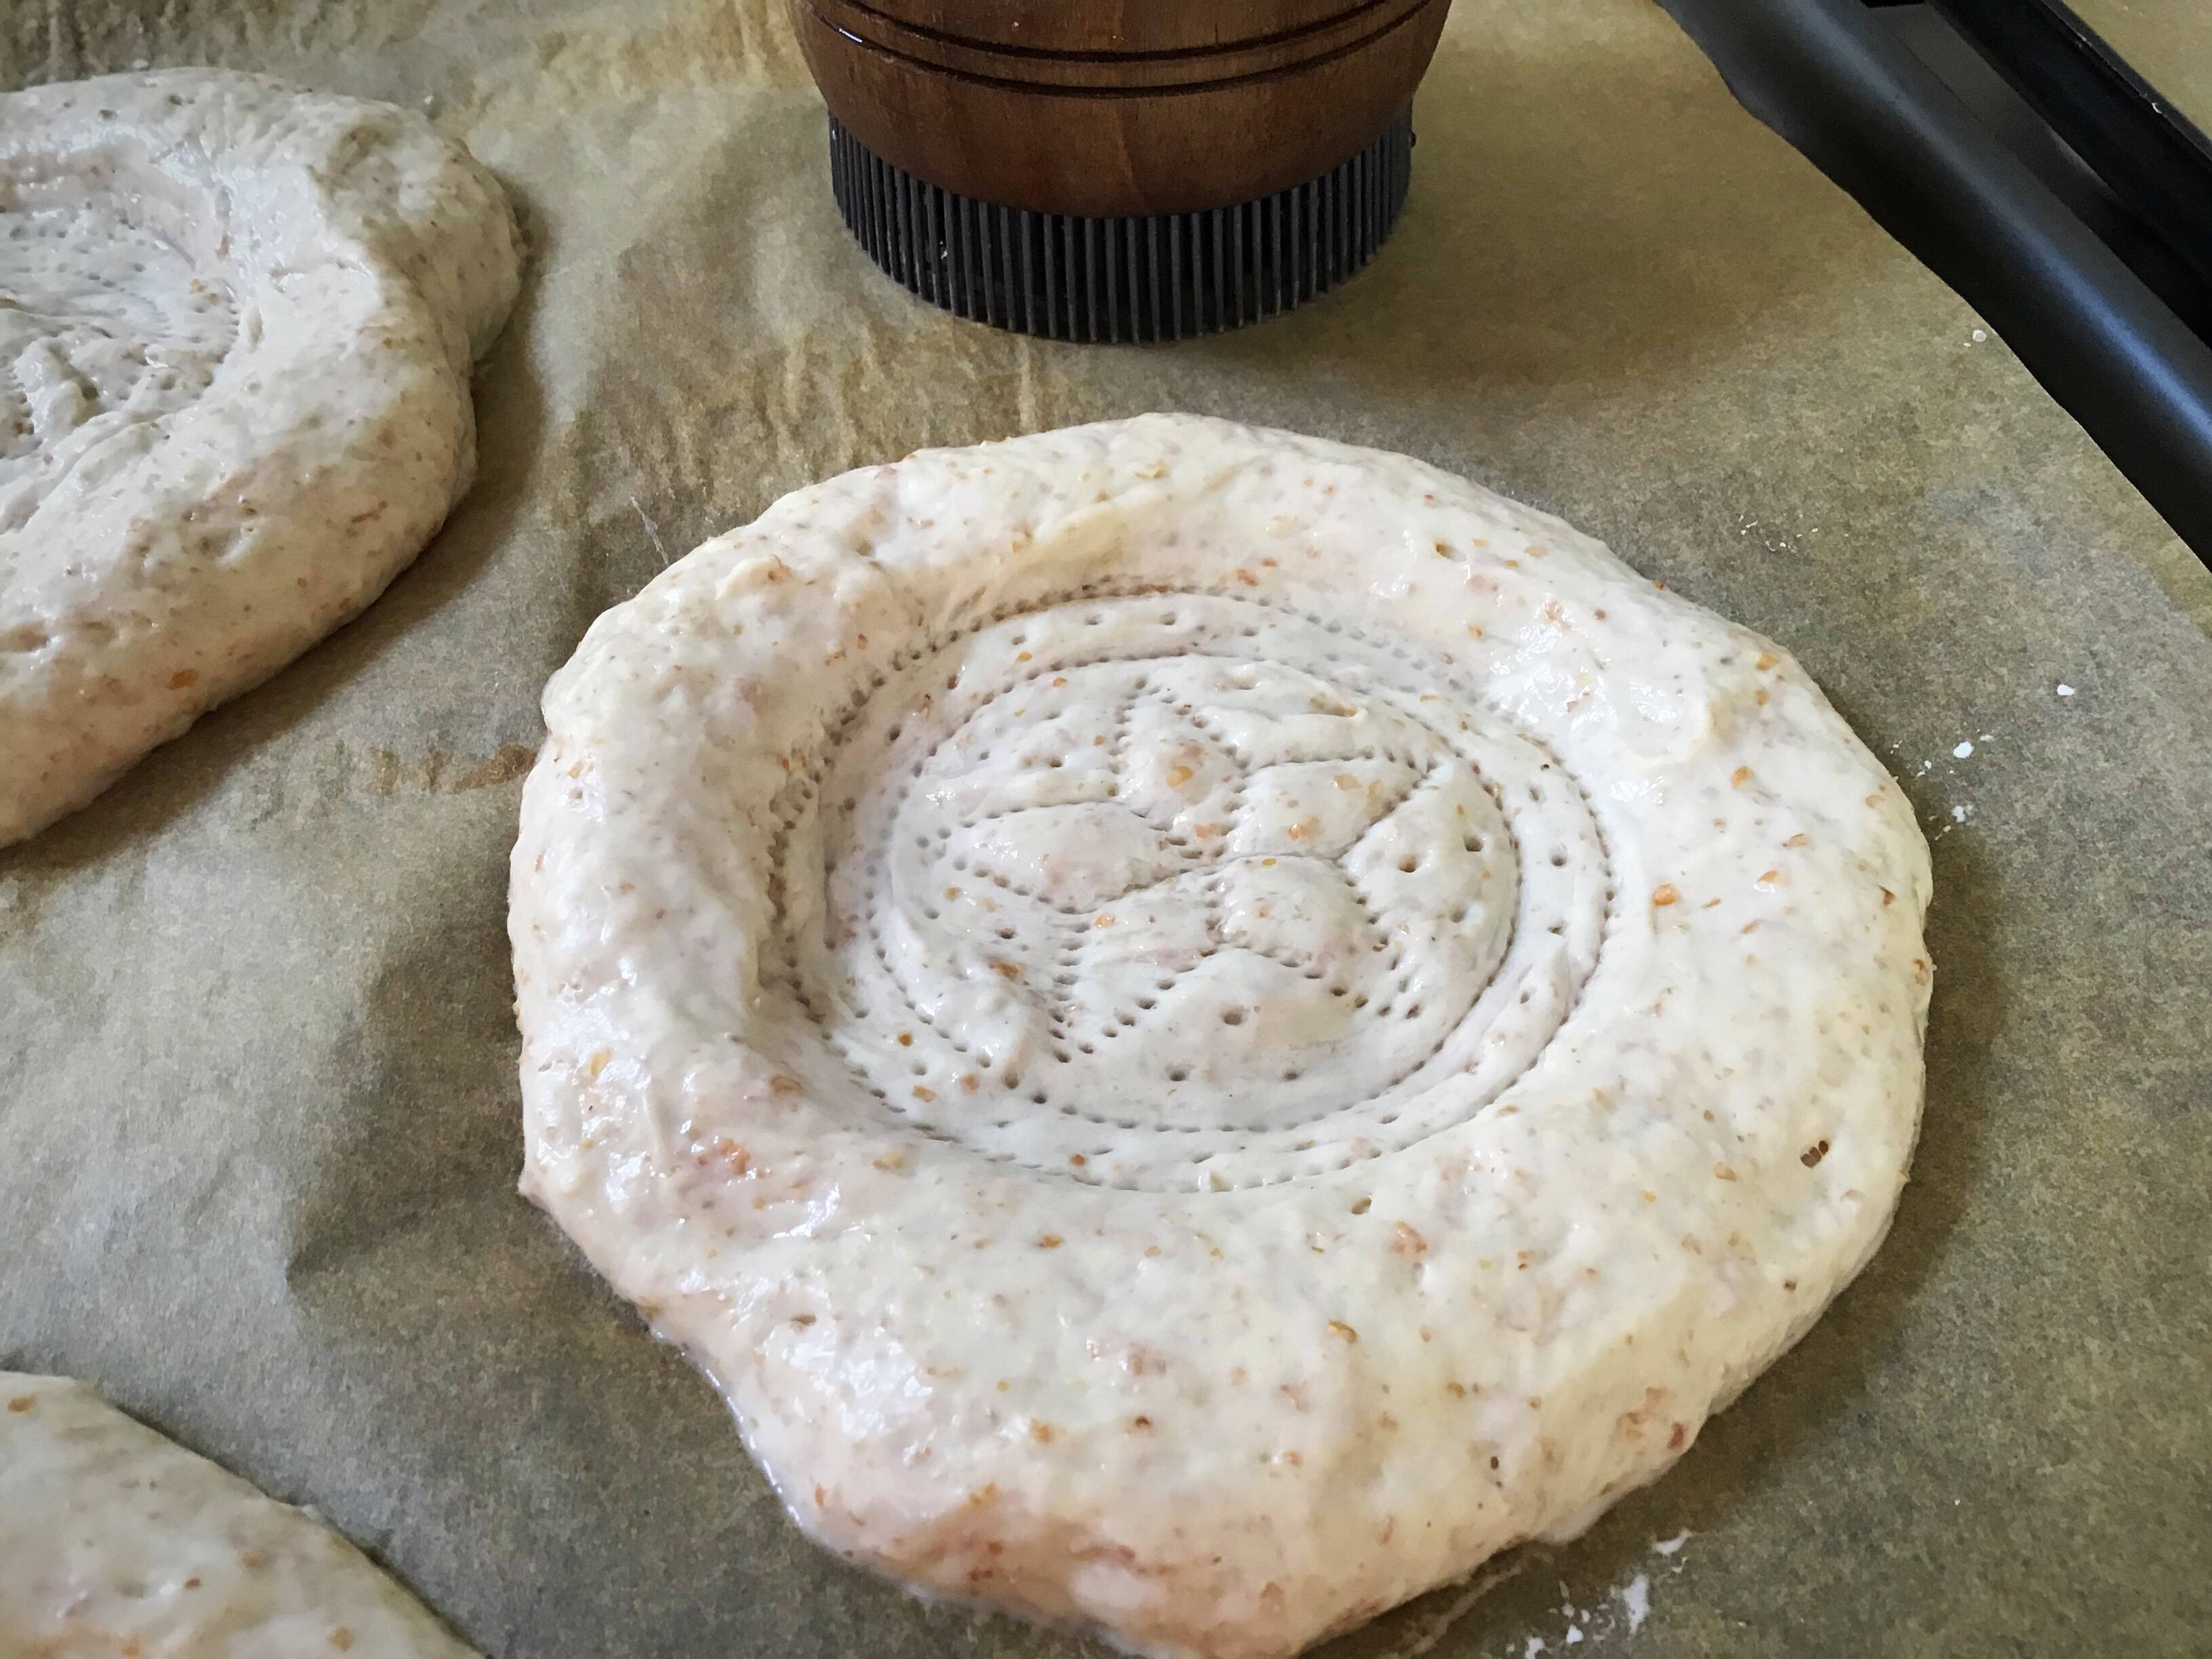 A round pastry with a star design on it.